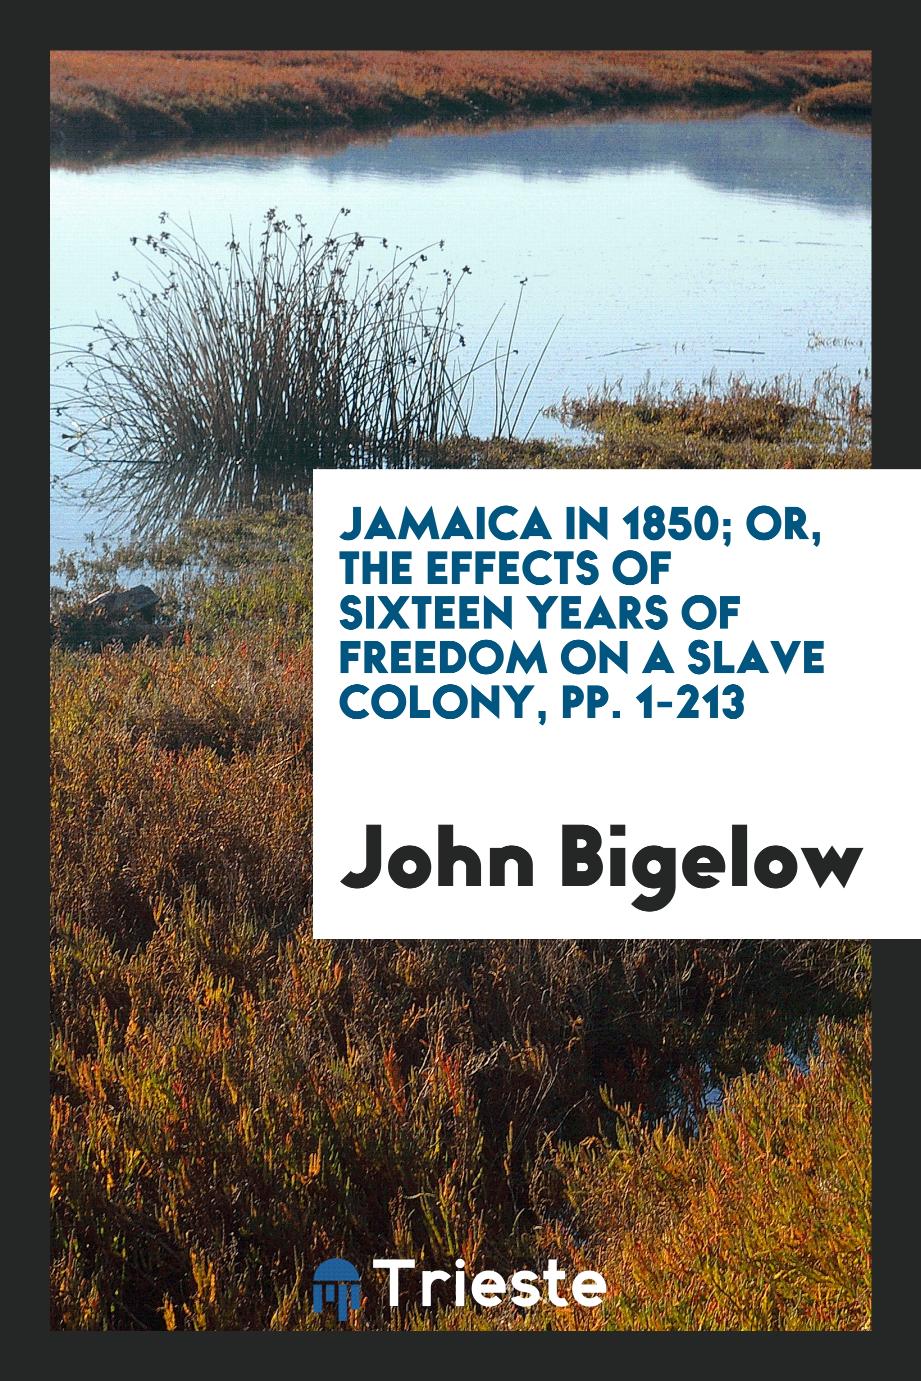 Jamaica in 1850; Or, The Effects of Sixteen Years of Freedom on a Slave Colony, pp. 1-213